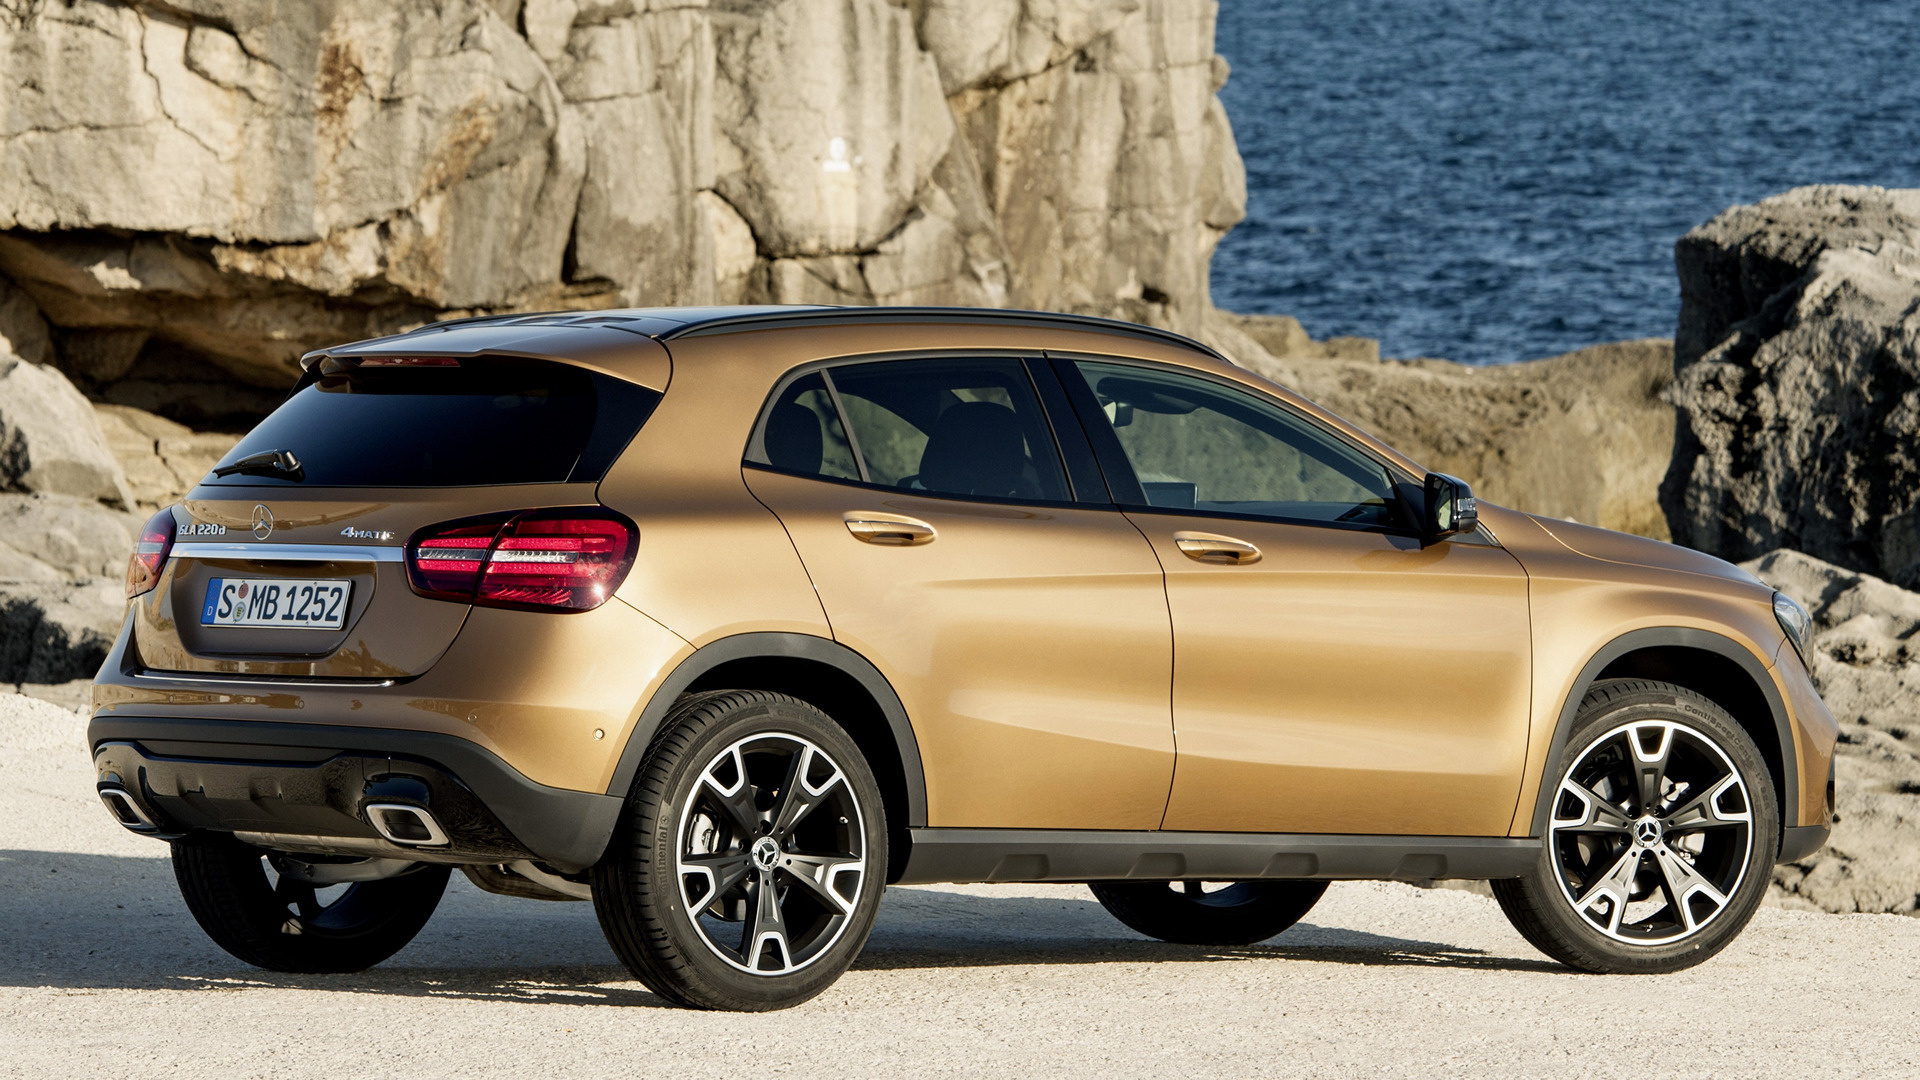 2017 Mercedes-Benz GLA-Class - Wallpapers and HD Images ...